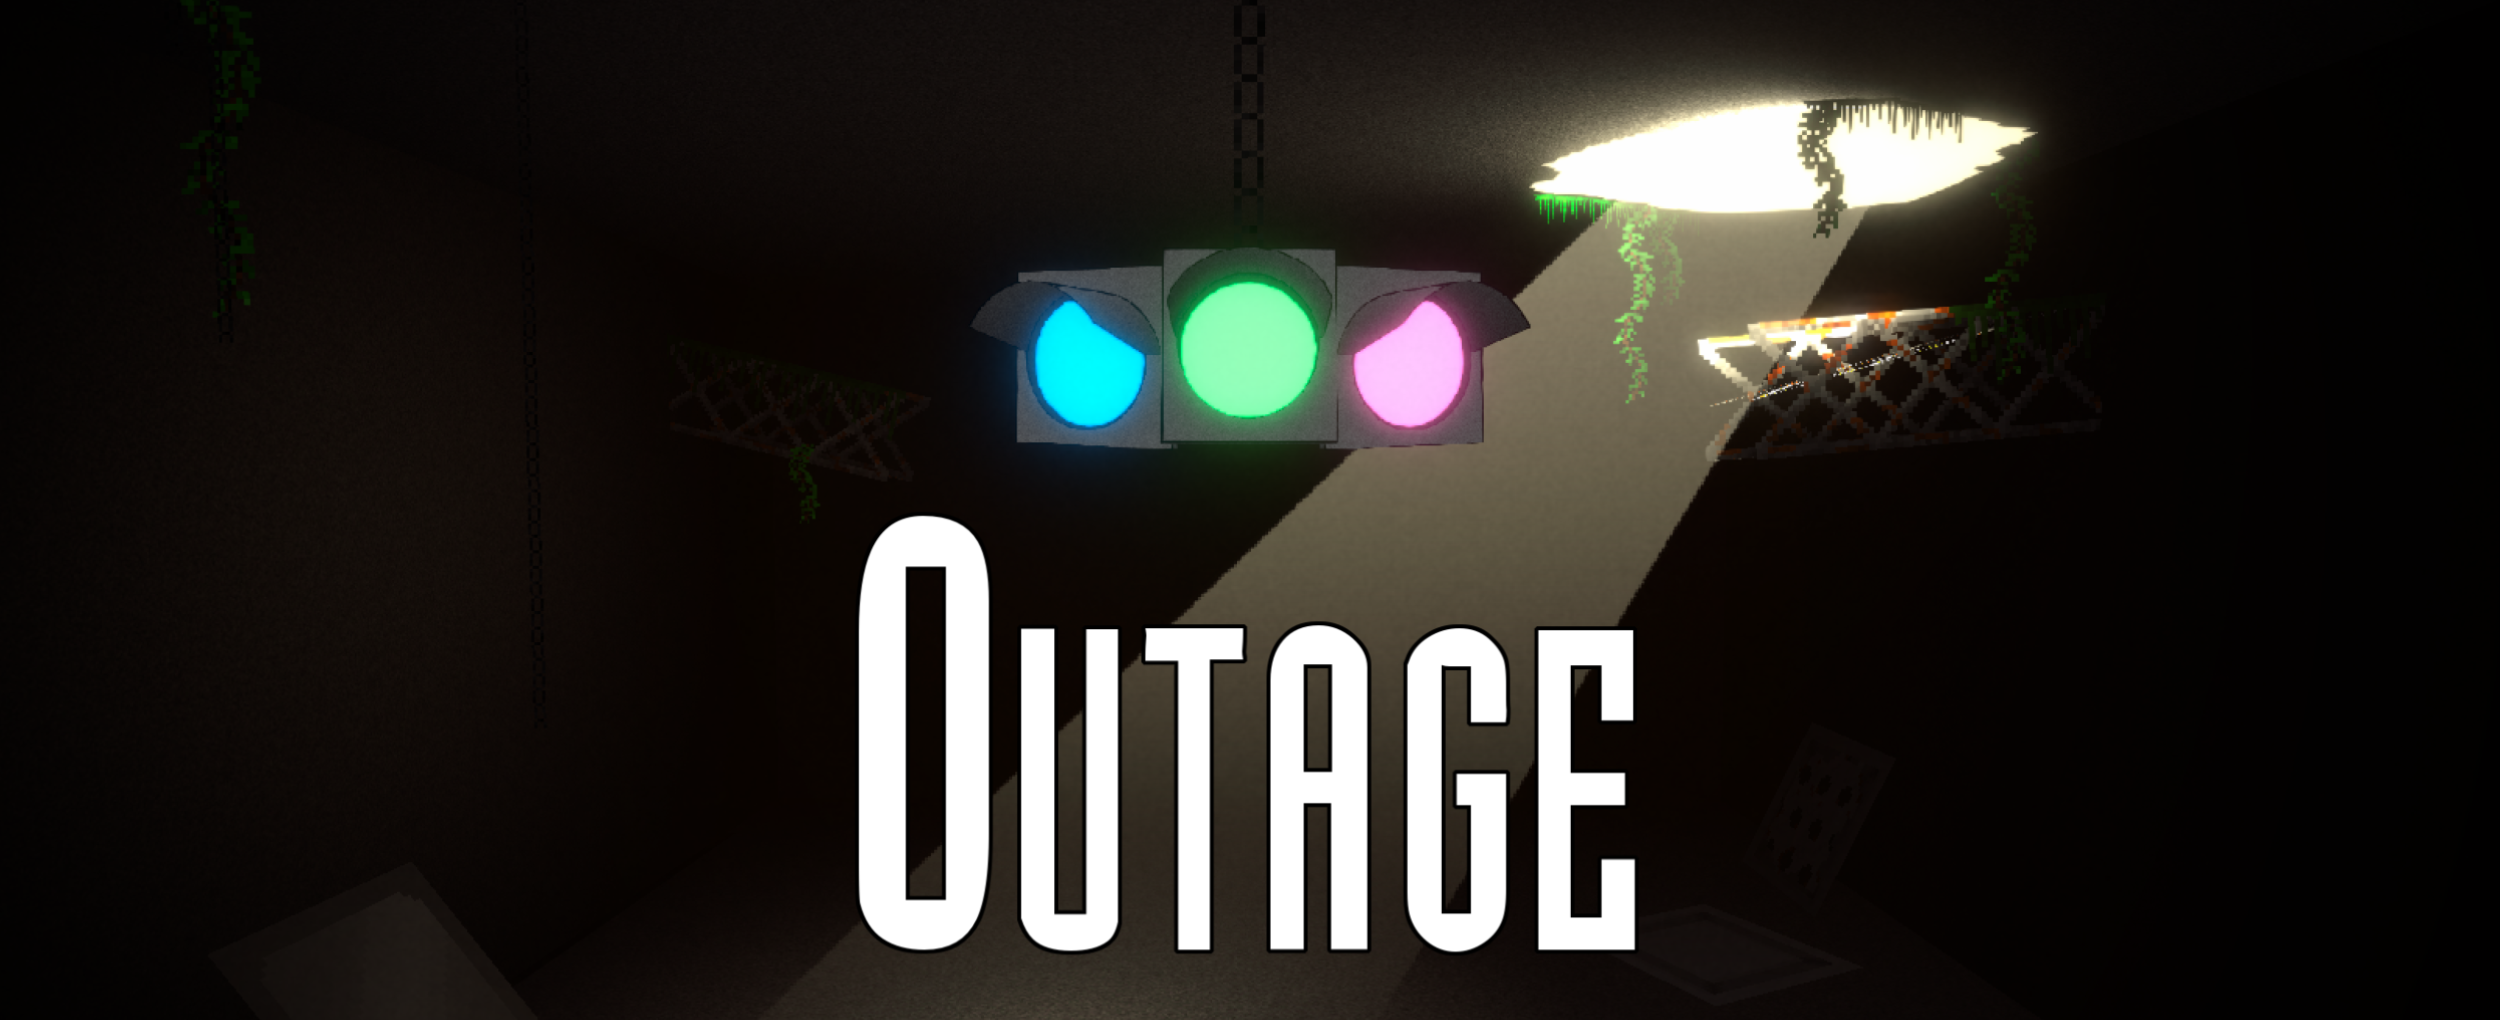 Outage